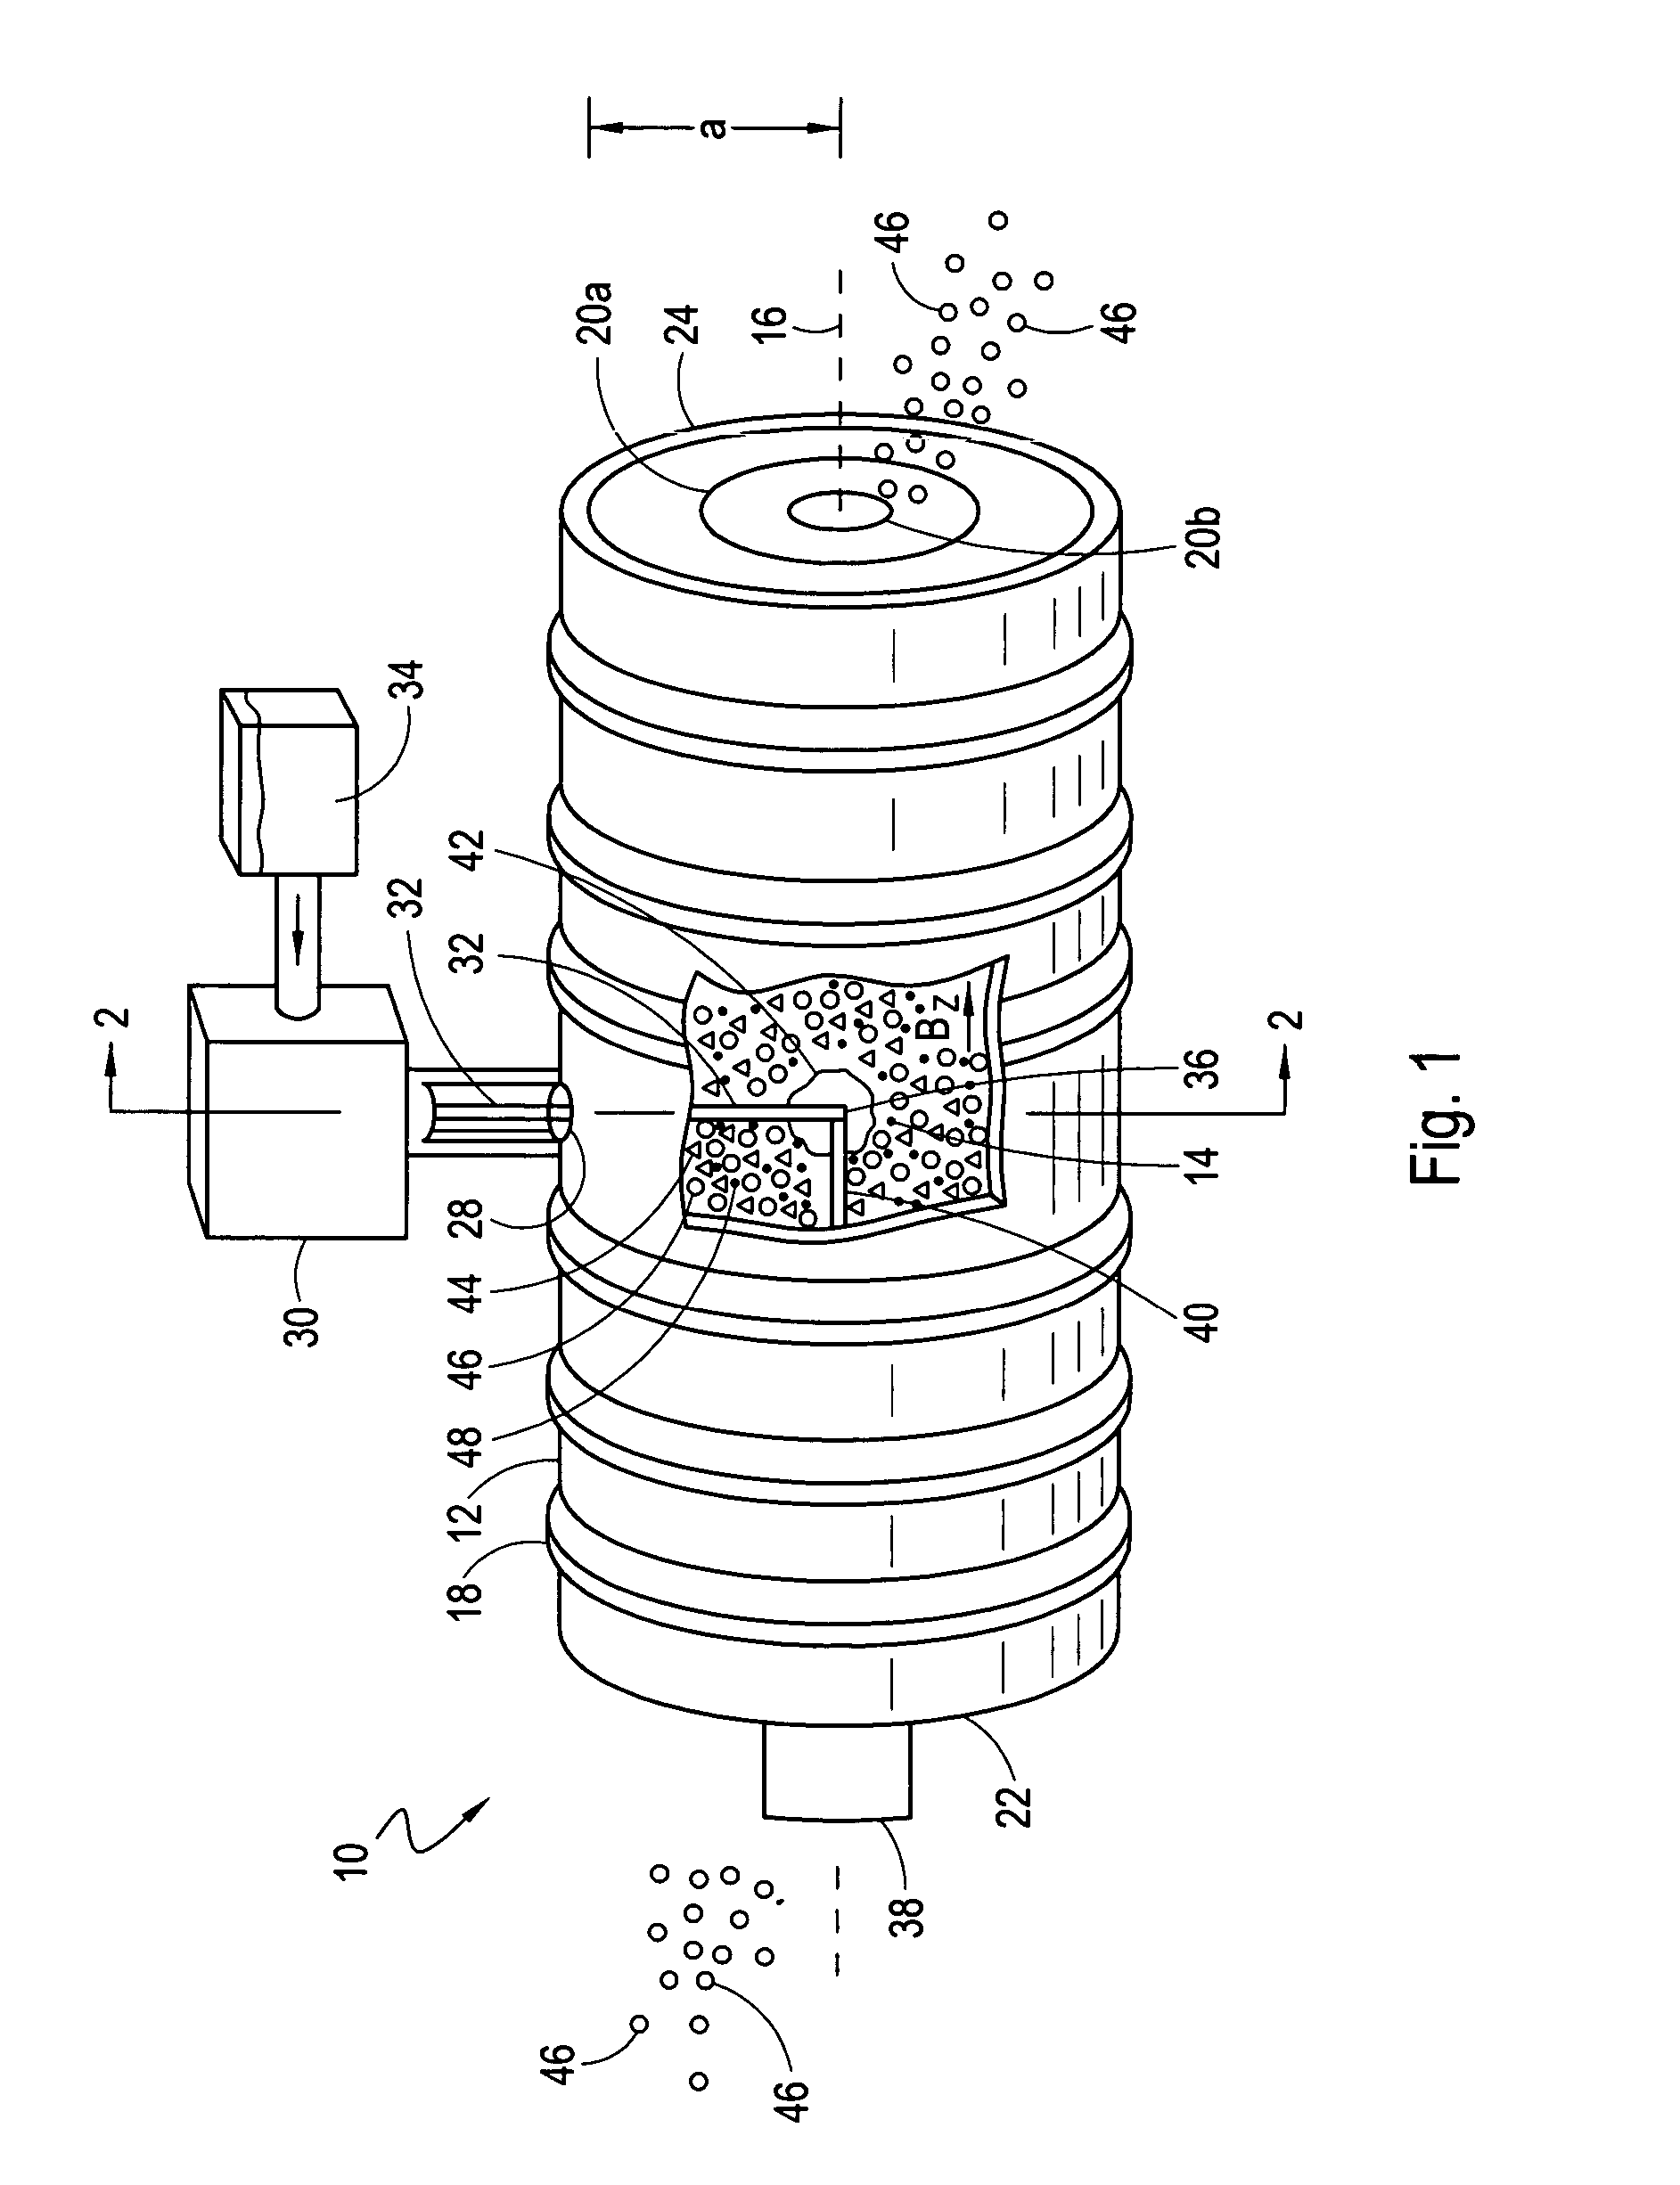 Injector for plasma mass filter